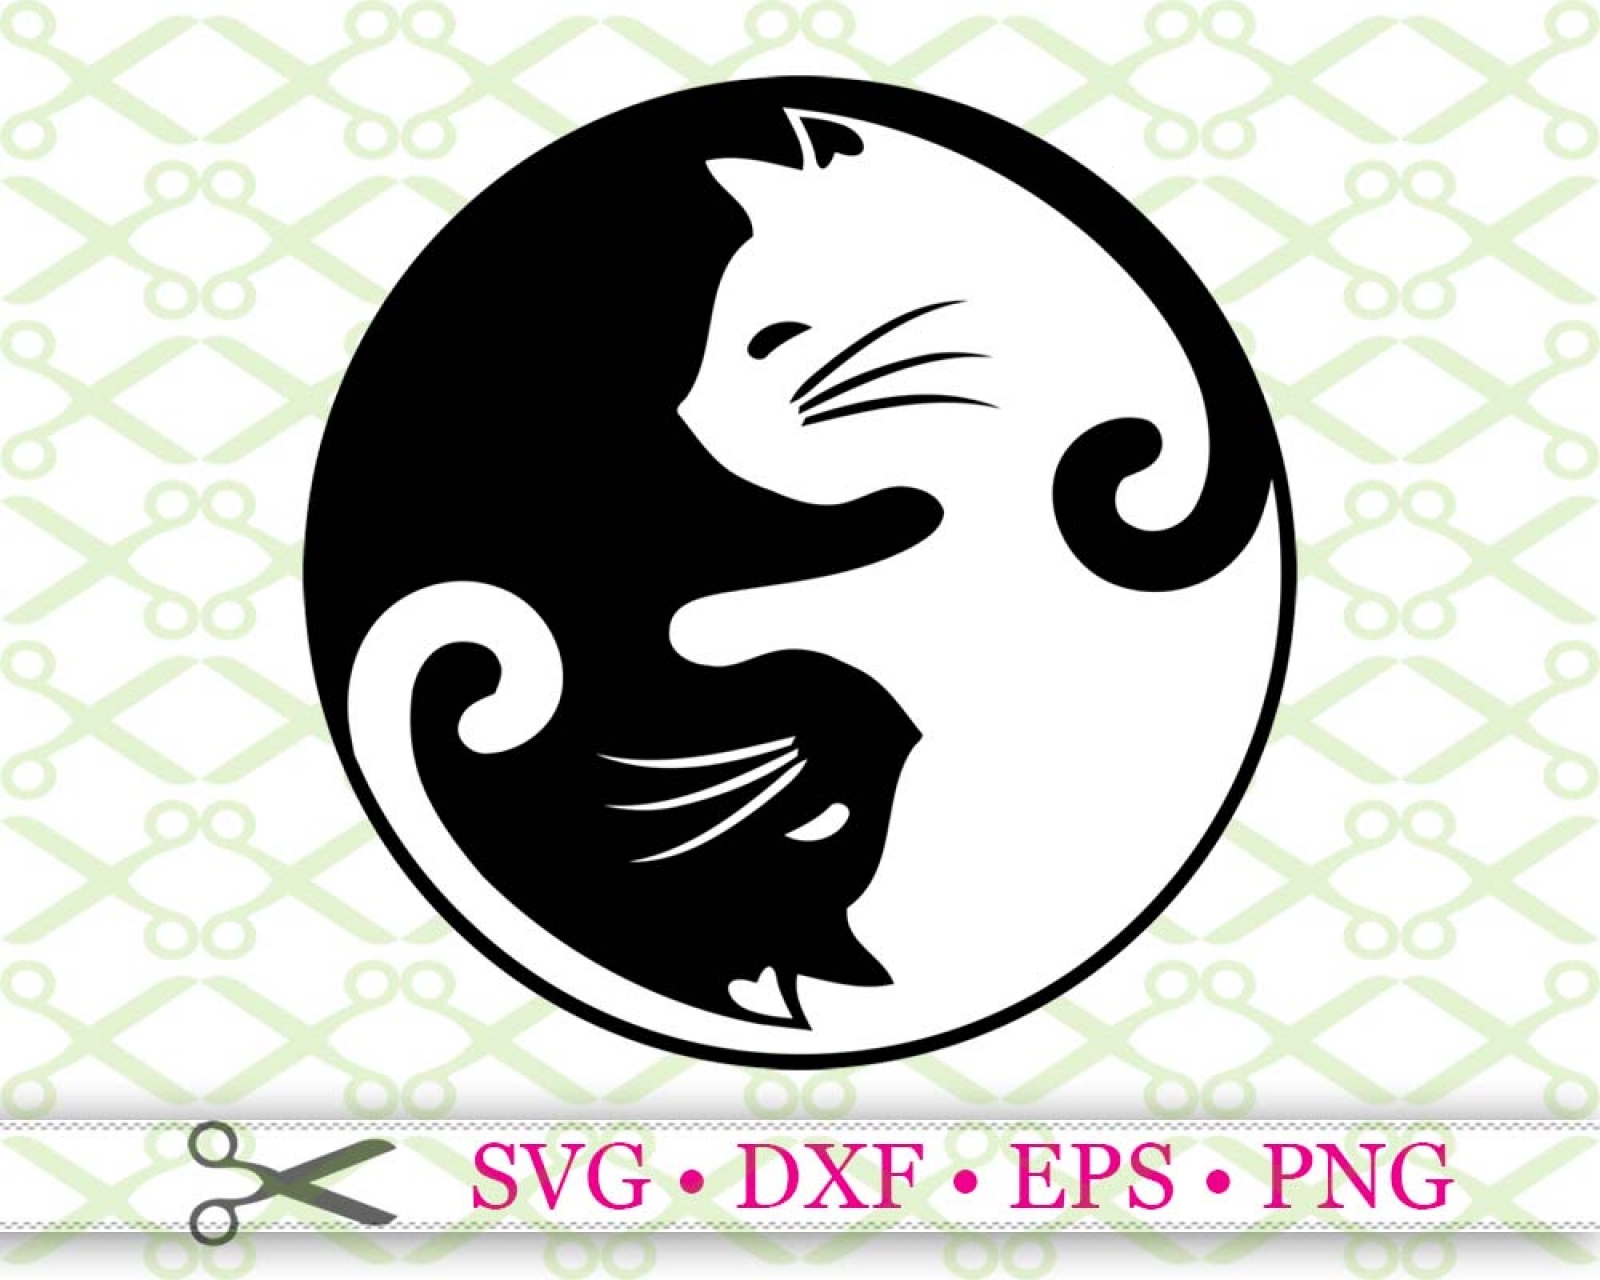 YIN YANG CATS SVG FILE-Cricut & Silhouette Files SVG DXF EPS PNG ...